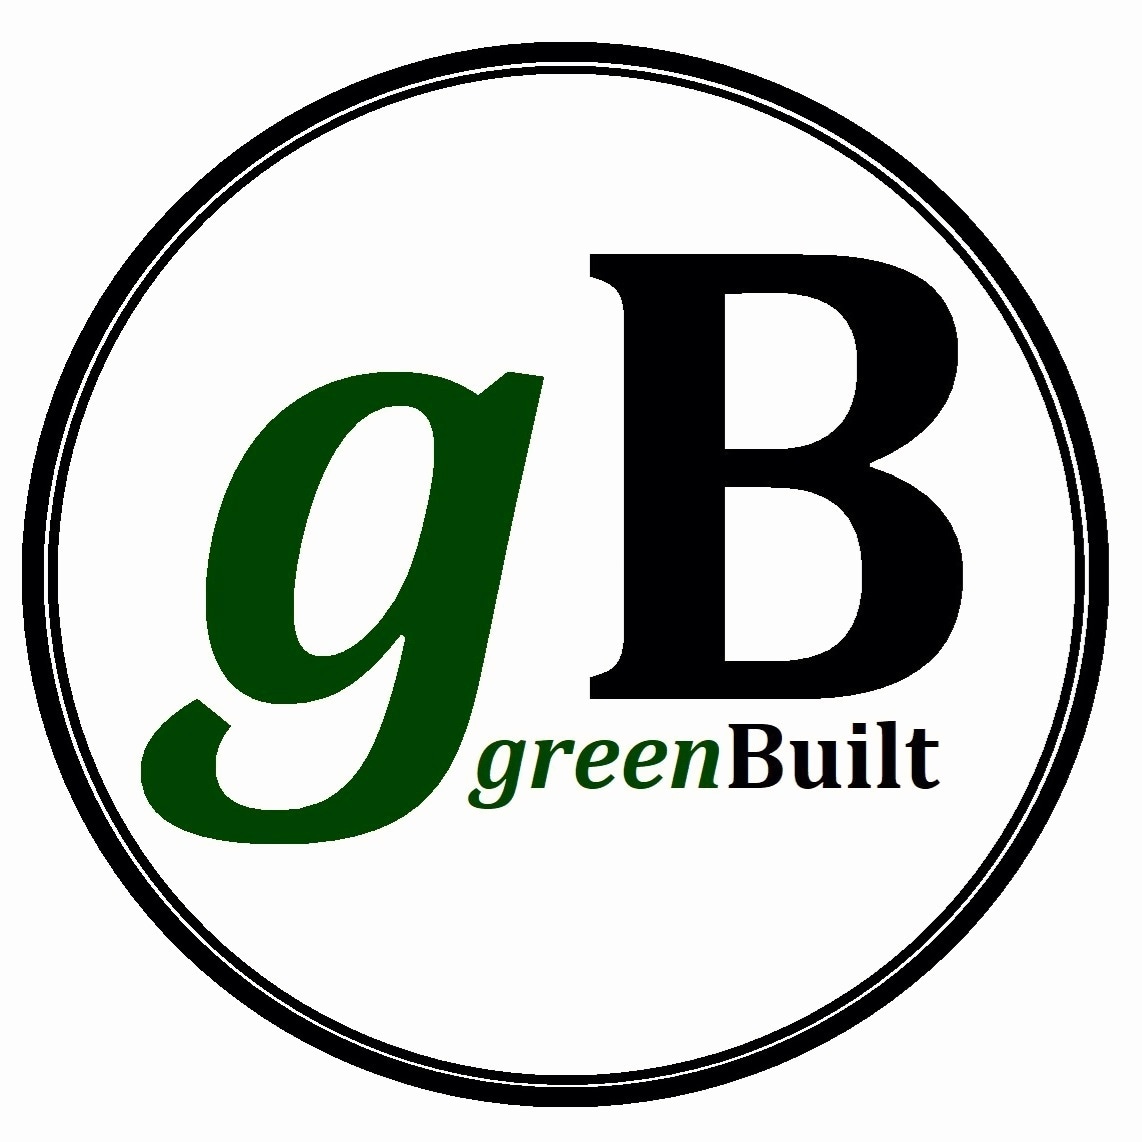 We Fight #ClimateChange #GlobalWarming!
EVERY.
SINGLE.
DAY.
One #AffordableHousing #Housing project at a time.

Worldwide.

Learn more about our #ZeroCarbon #Green #Sustainable CAFboard #BuildingProducts at …builtinternationalbuildingcompany.com

Contact us: gbibuildingco@outlook.com @followers